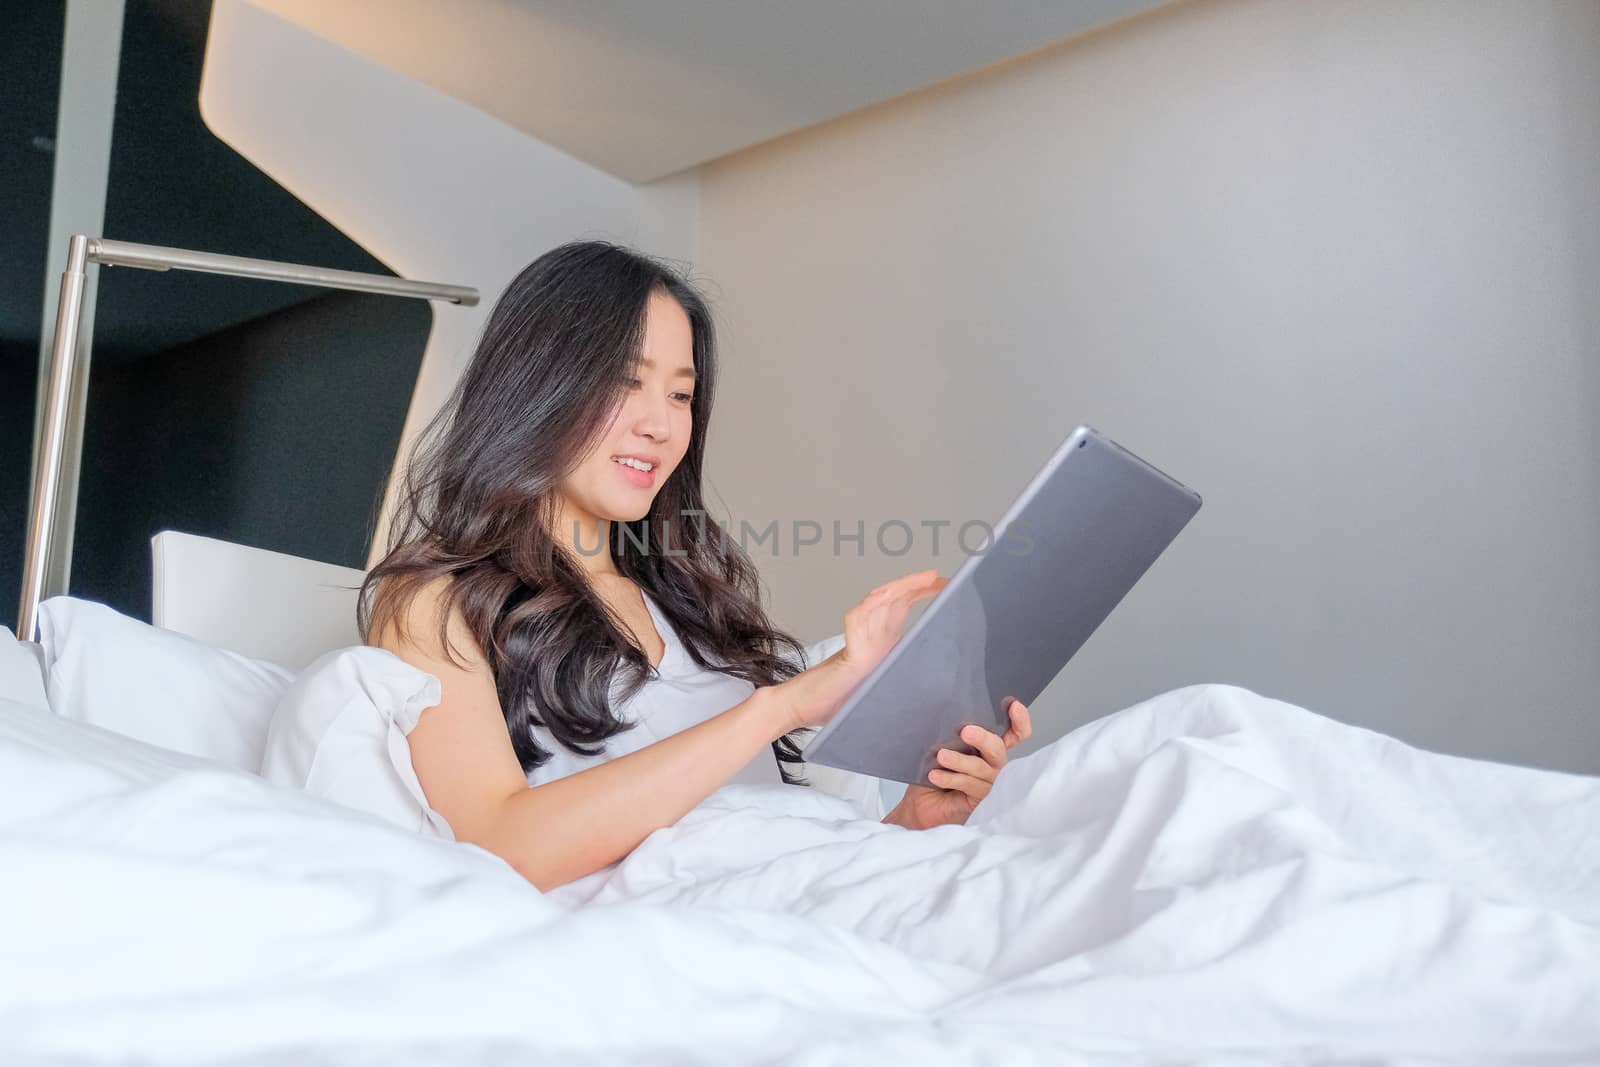 Yound woman using tablet on the bed  by Surasak